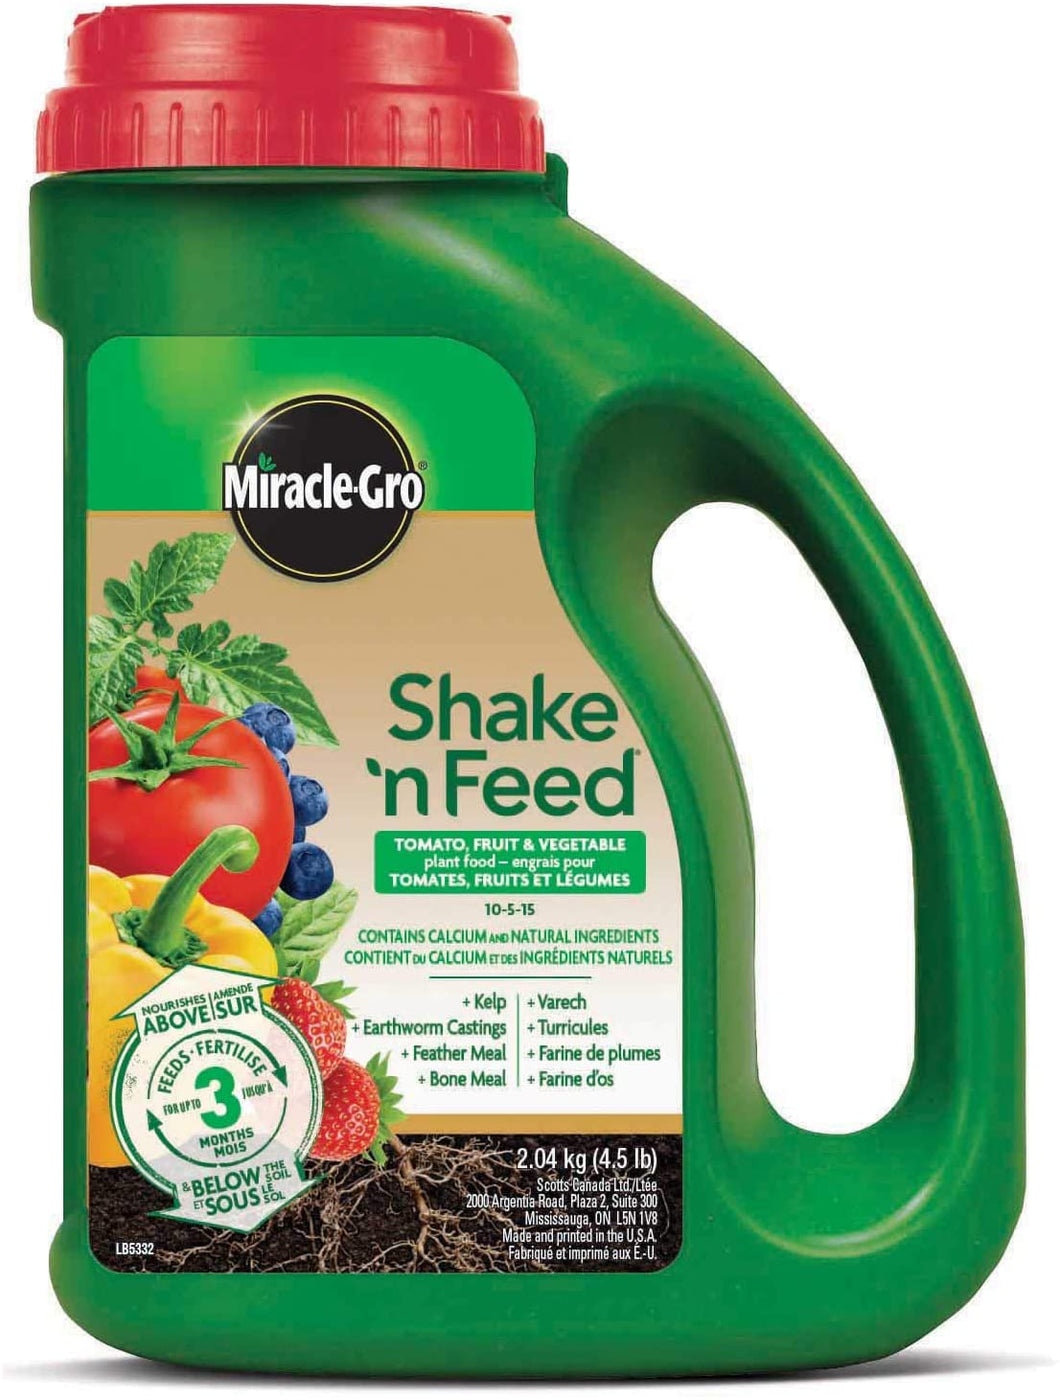 Miracle-Gro Shake N Feed Tomato, Fruits & Vegetables Plant Food 10-5-15 2.04 Kg - Garden Centre - Nursery